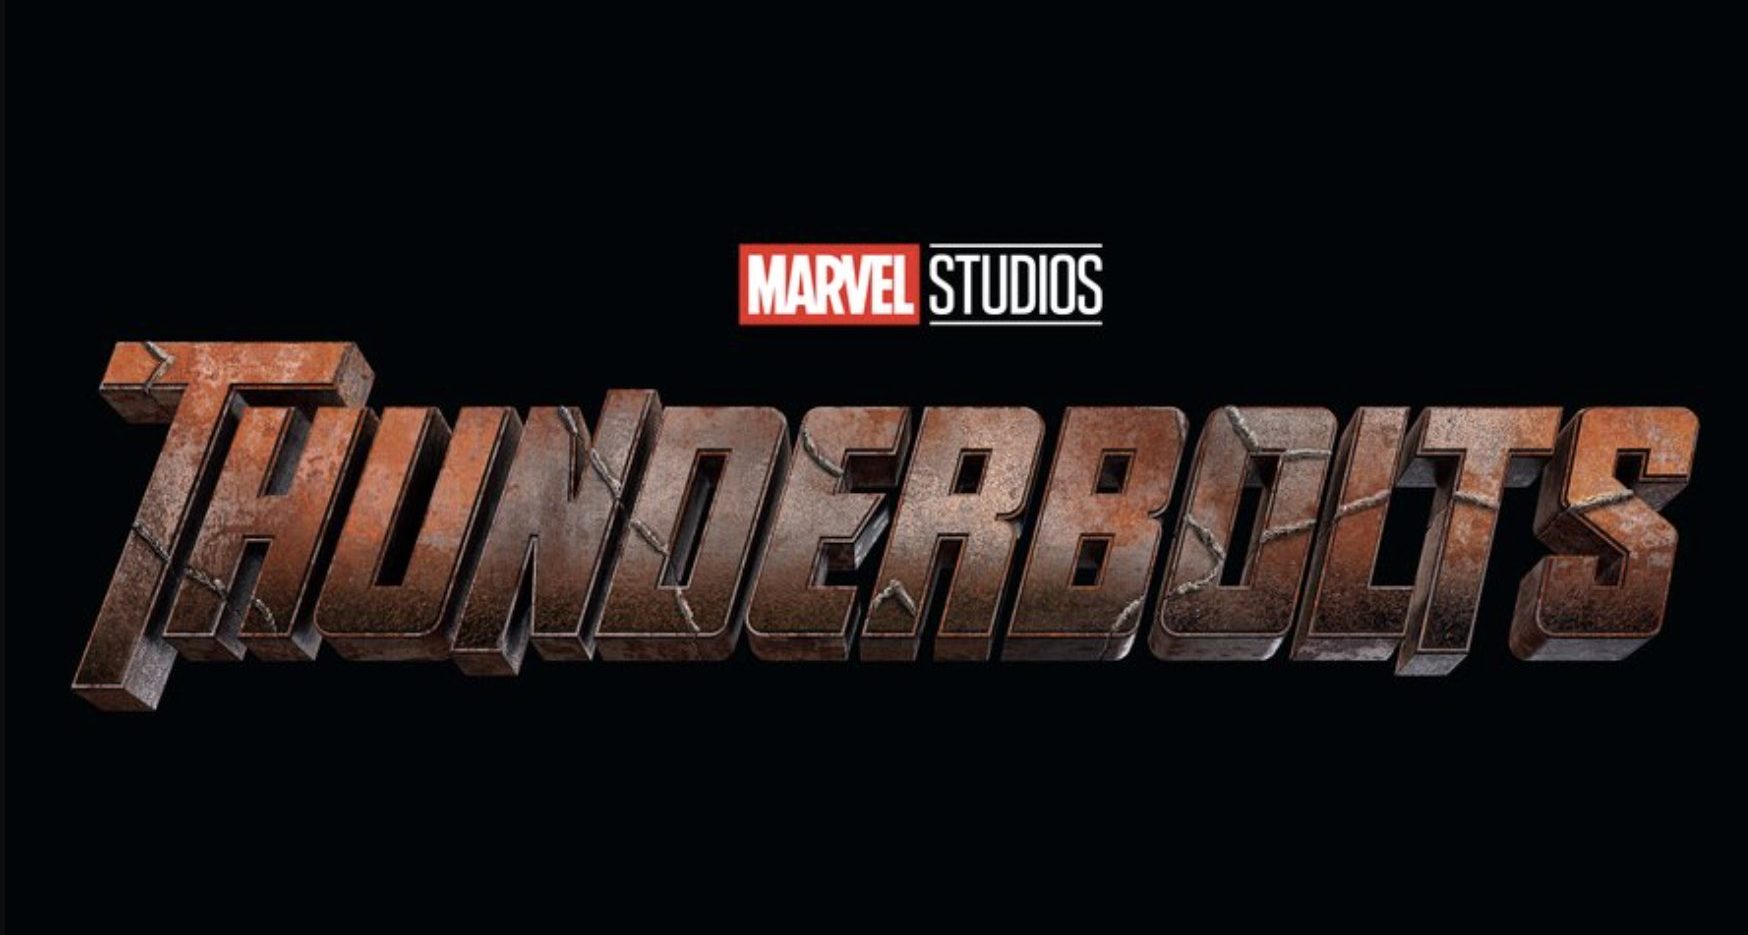 It is being reported Thunderbolts is the latest Marvel production to get delayed due to the ongoing WGA strike.